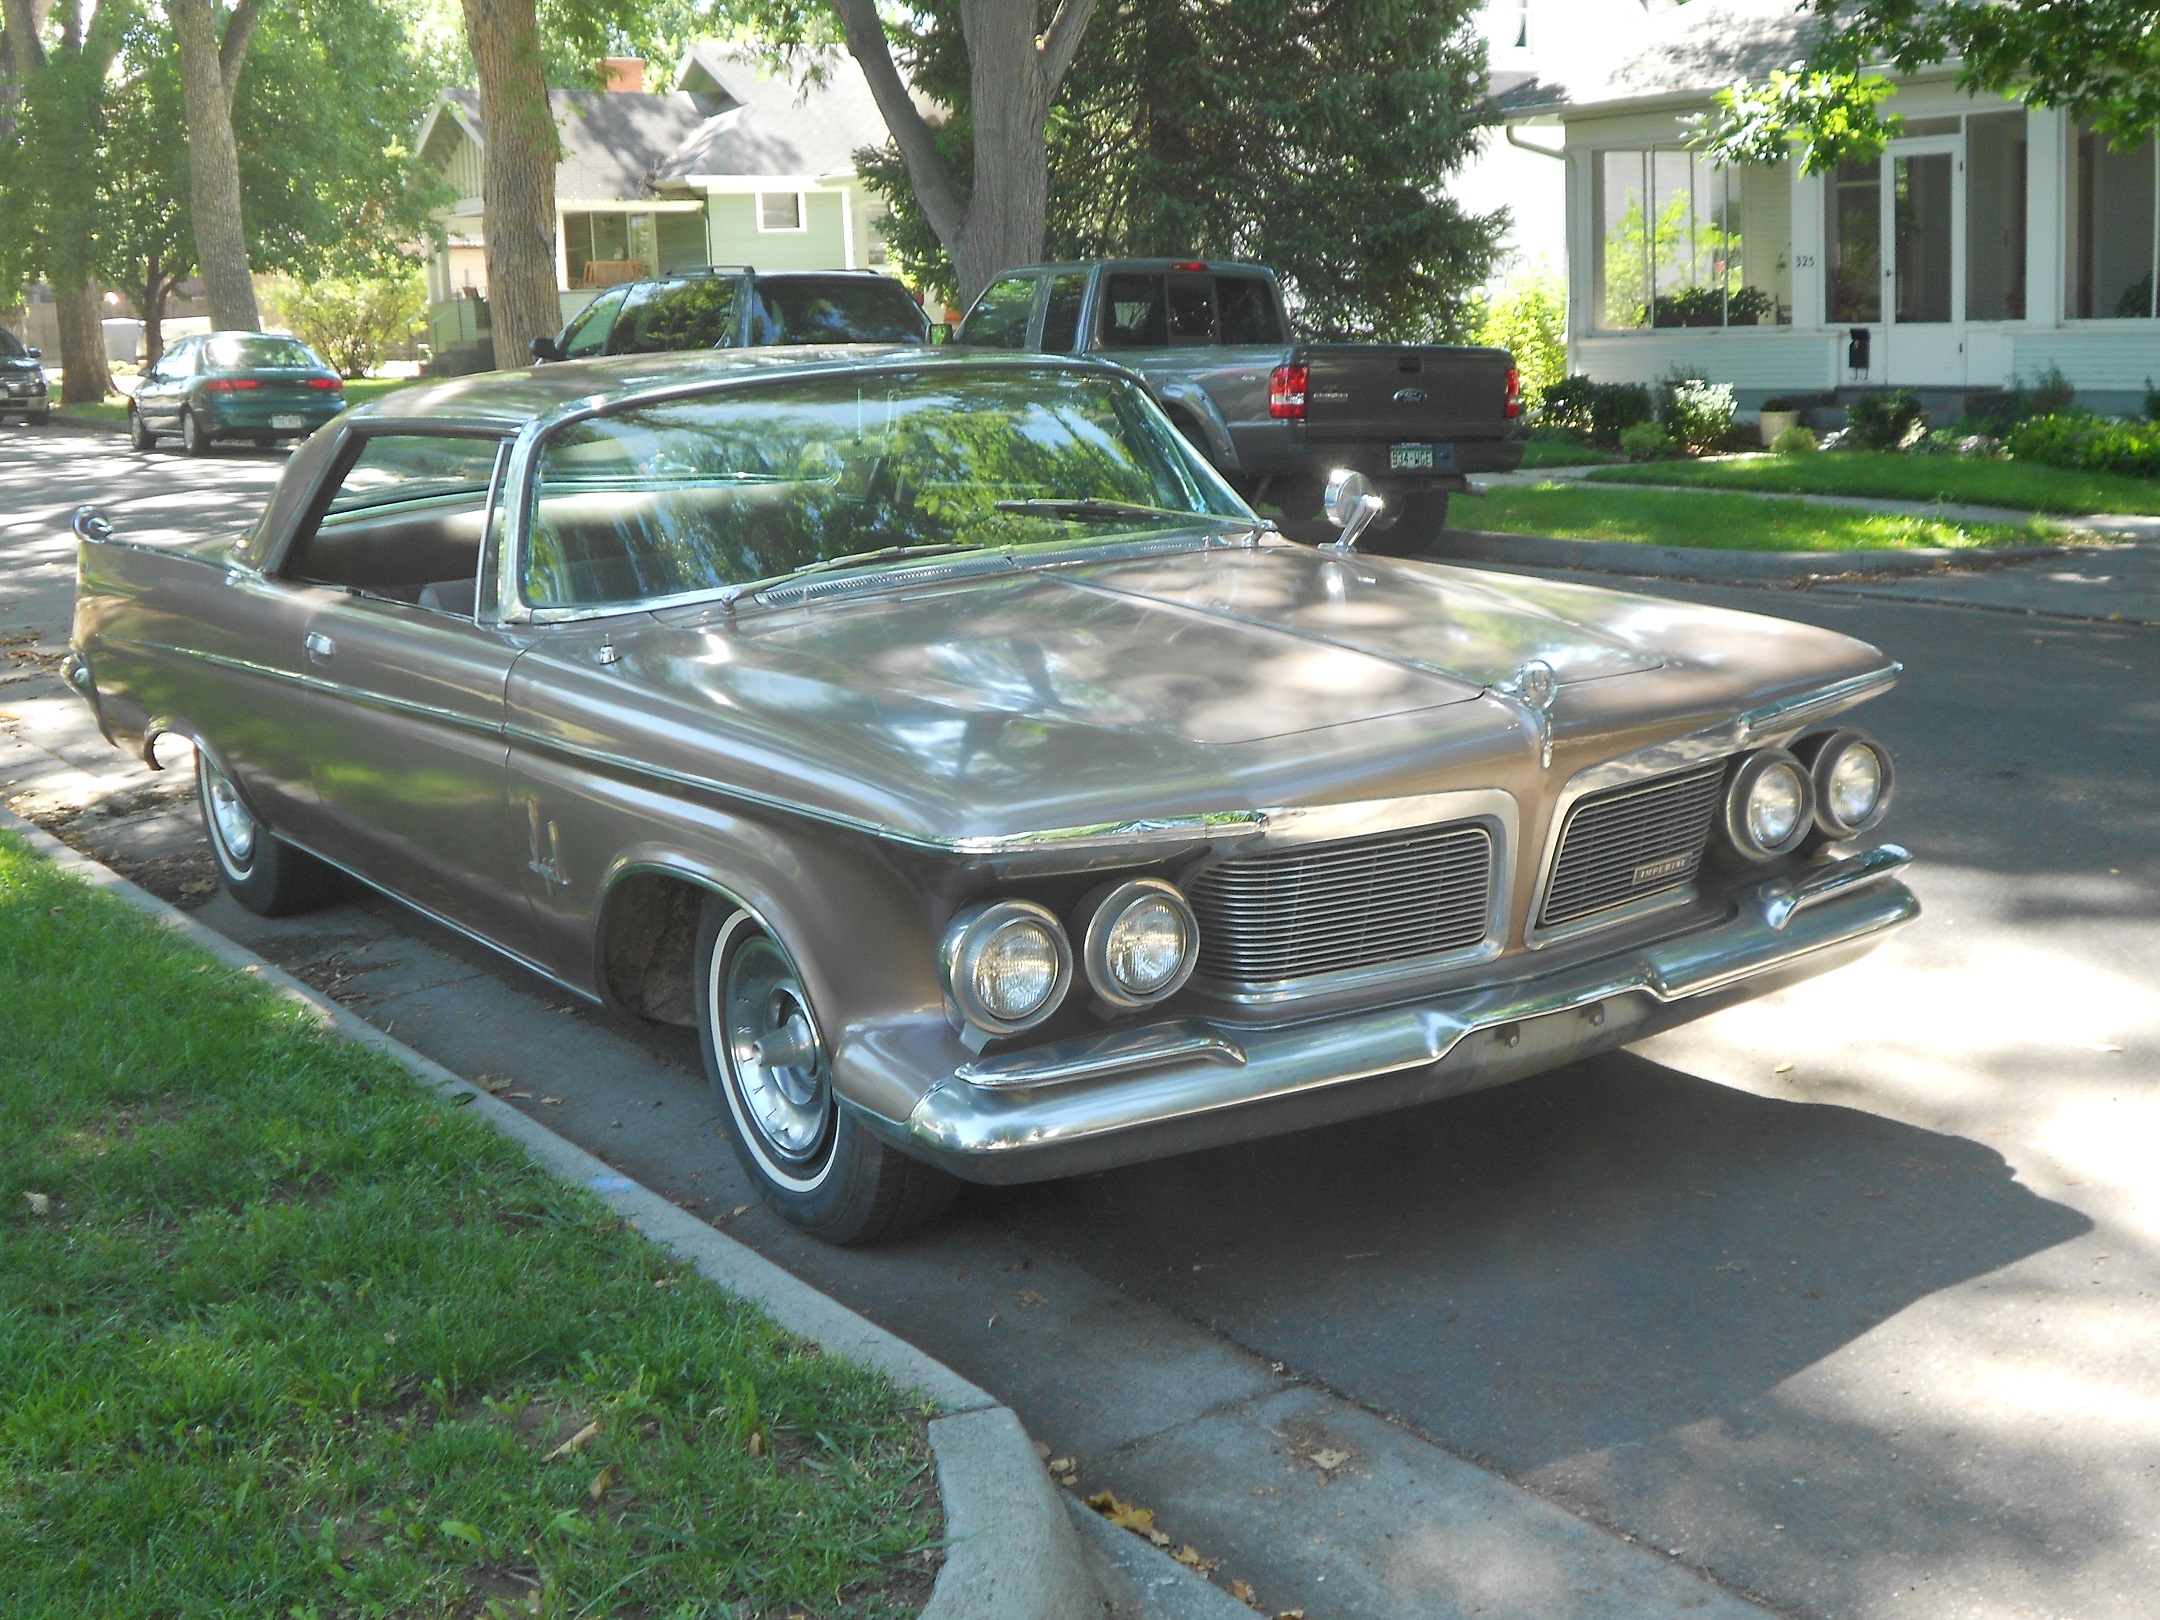 1962 Chrysler imperial parts #2